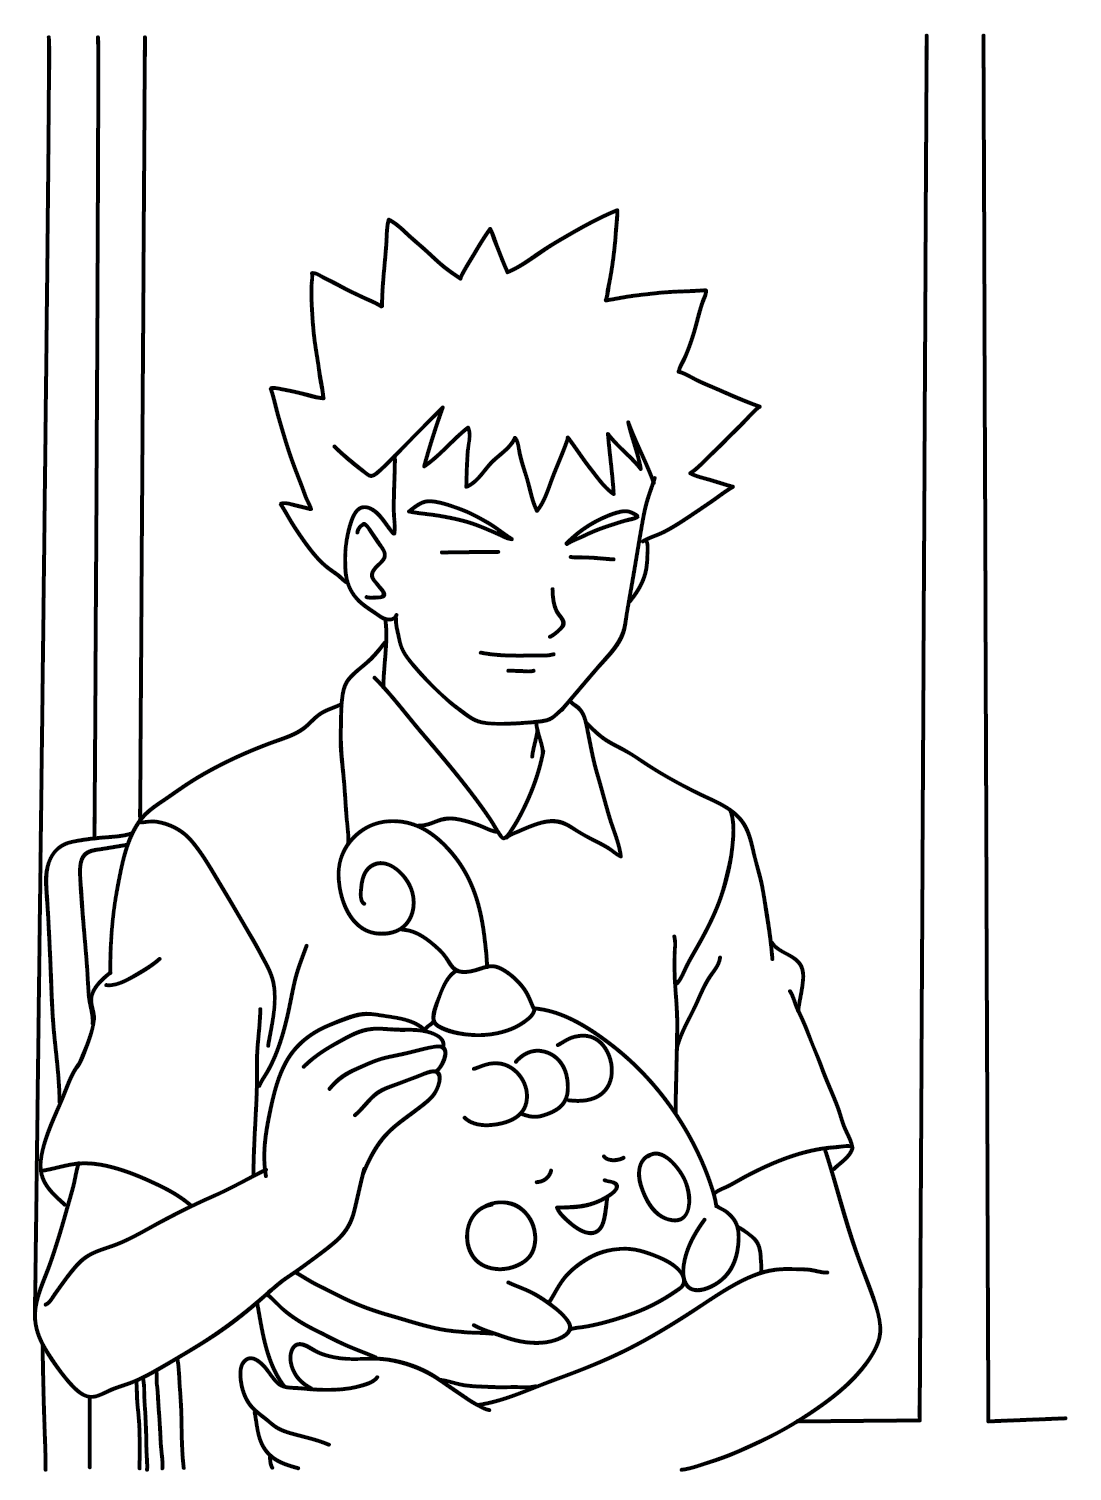 Coloring Page Brock from Brock